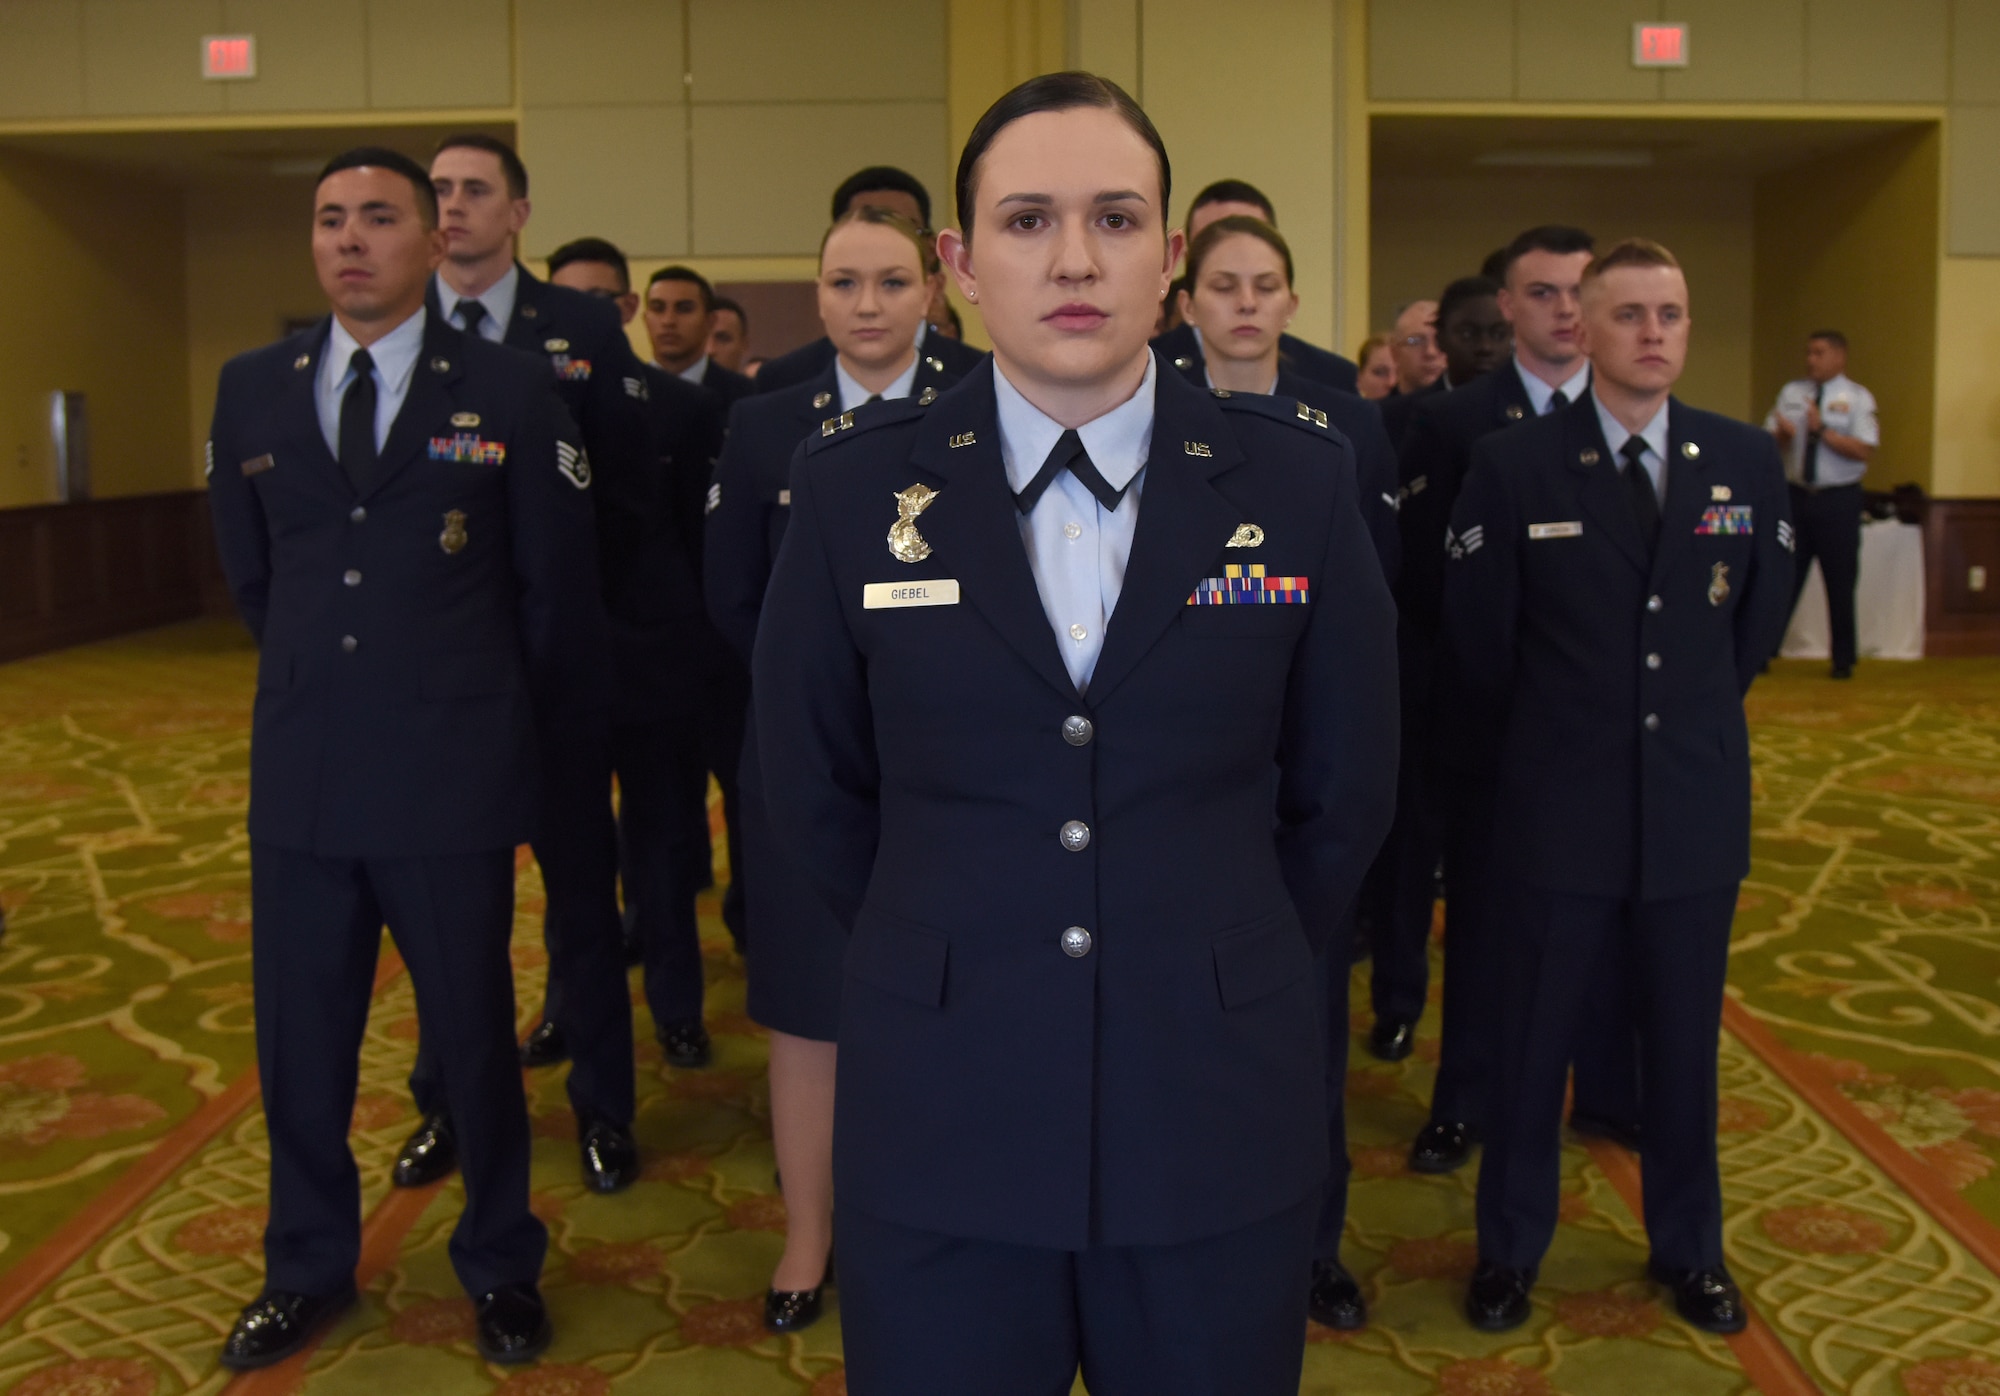 U.S. Air Force Capt. Samantha Giebel, 81st Security Forces Squadron operations officer, stands in formation during the 81st SFS change of command ceremony inside the Bay Breeze Event Center at Keesler Air Force Base, Mississippi, May 31, 2019. Maj. Matthew Lowe, incoming 81st SFS commander, assumed command from Lt. Col. Jonathon Murray, outgoing 81st SFS commander, with the passing of the guidon. The passing of the guidon is a ceremonial symbol of exchanging command from one commander to another. (U.S. Air Force photo by Kemberly Groue)